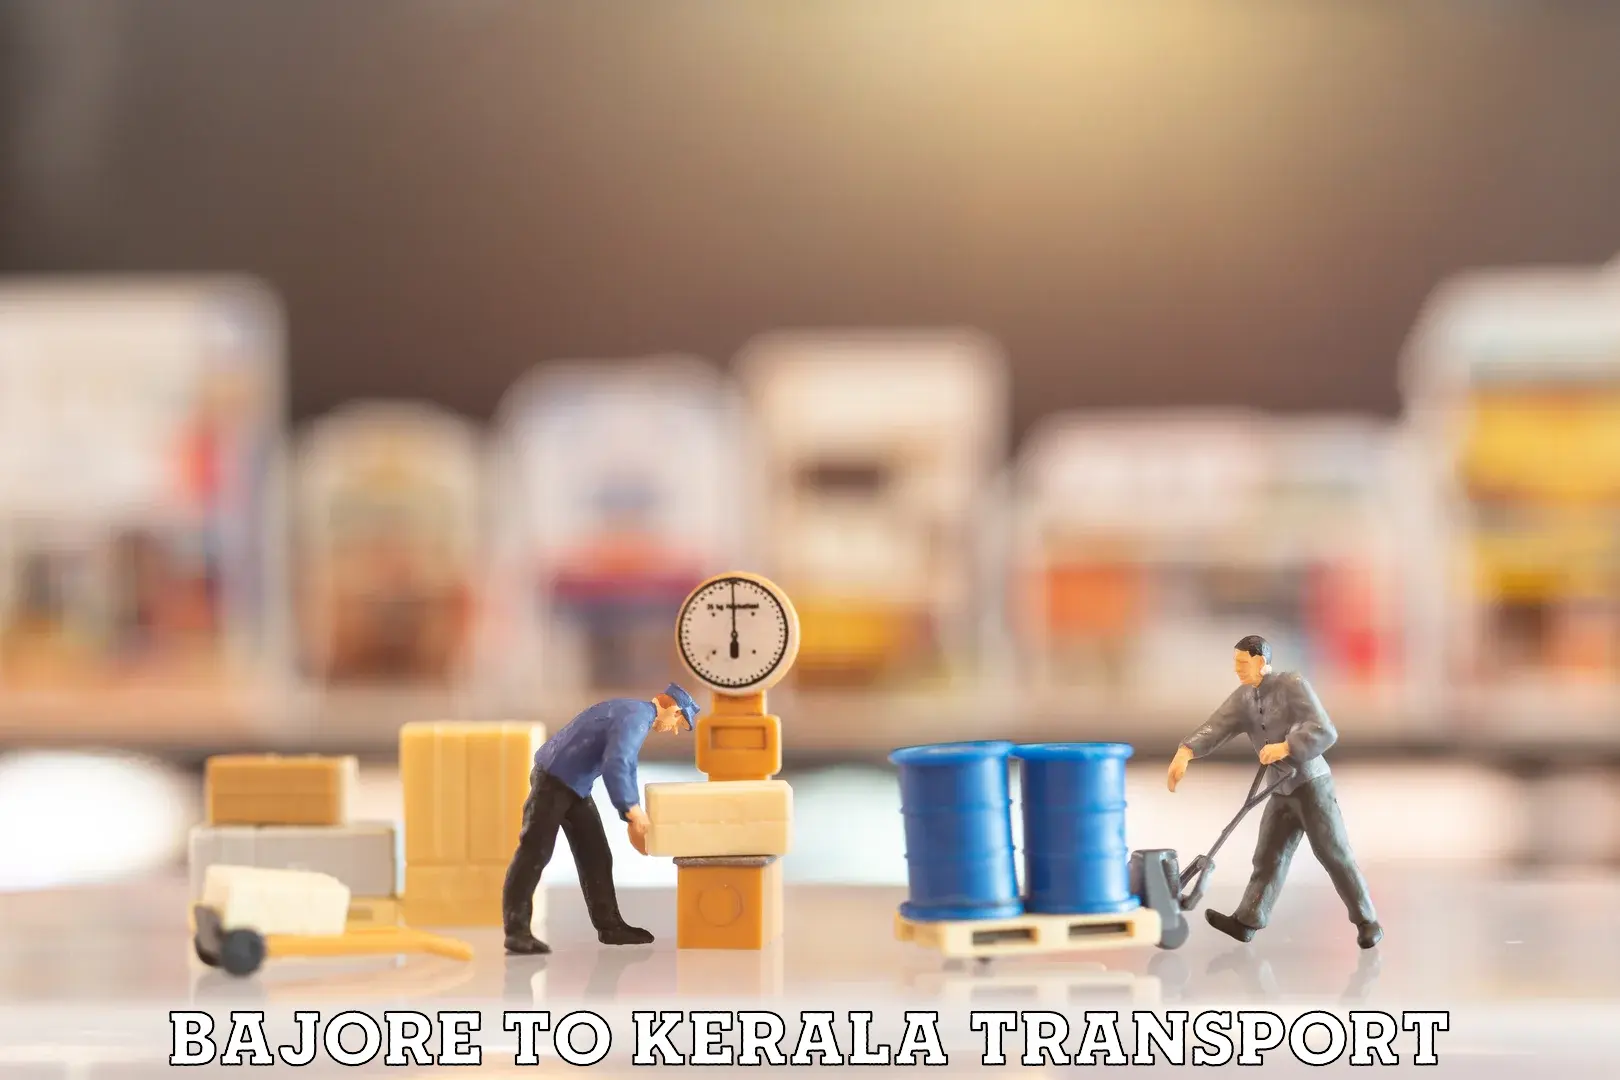 Goods delivery service Bajore to Kerala